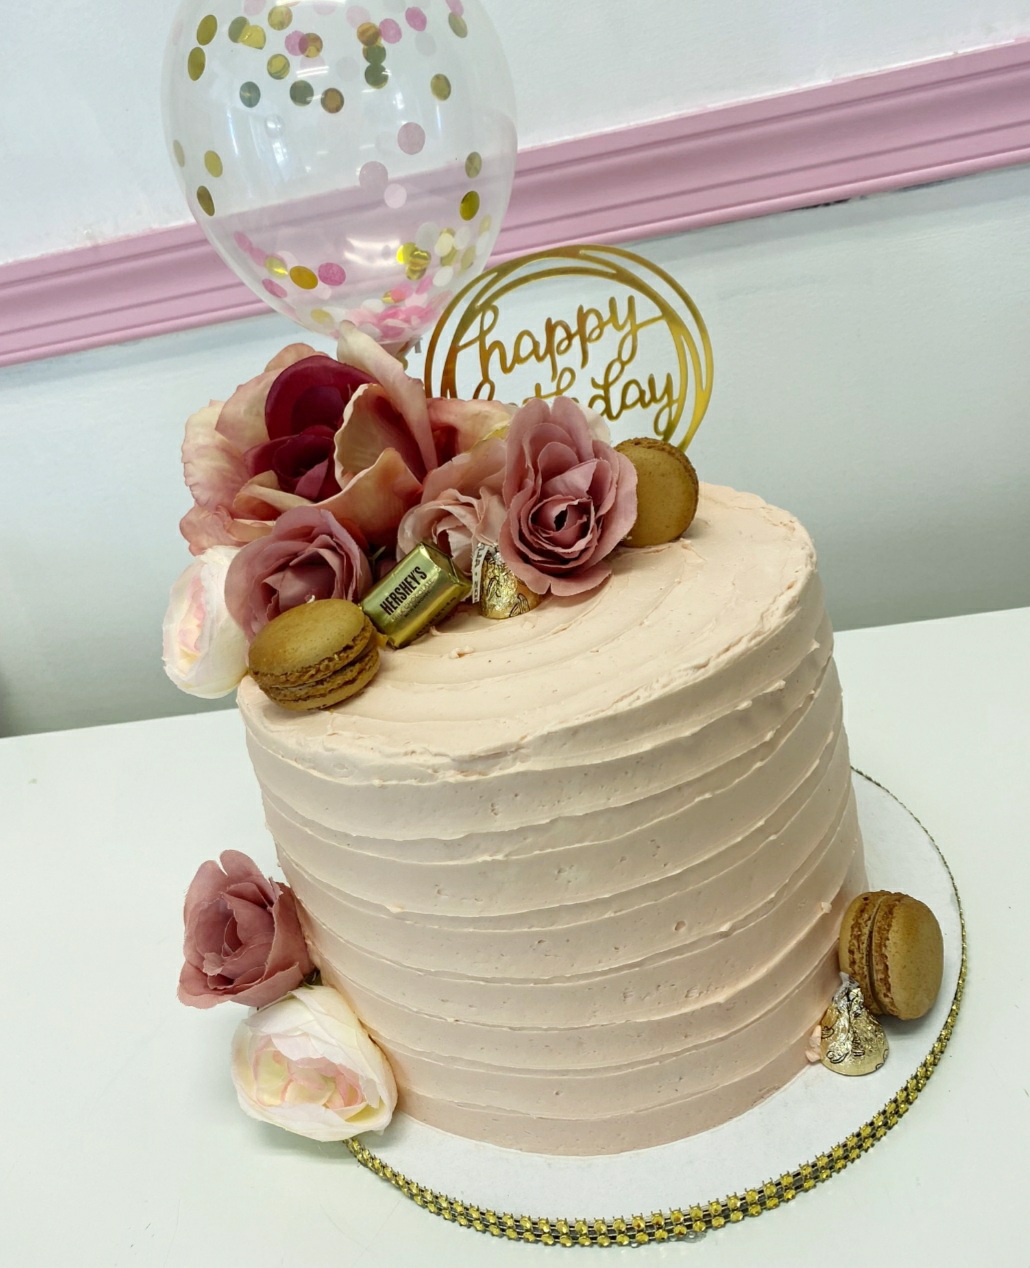 Cakes by Cynthia's